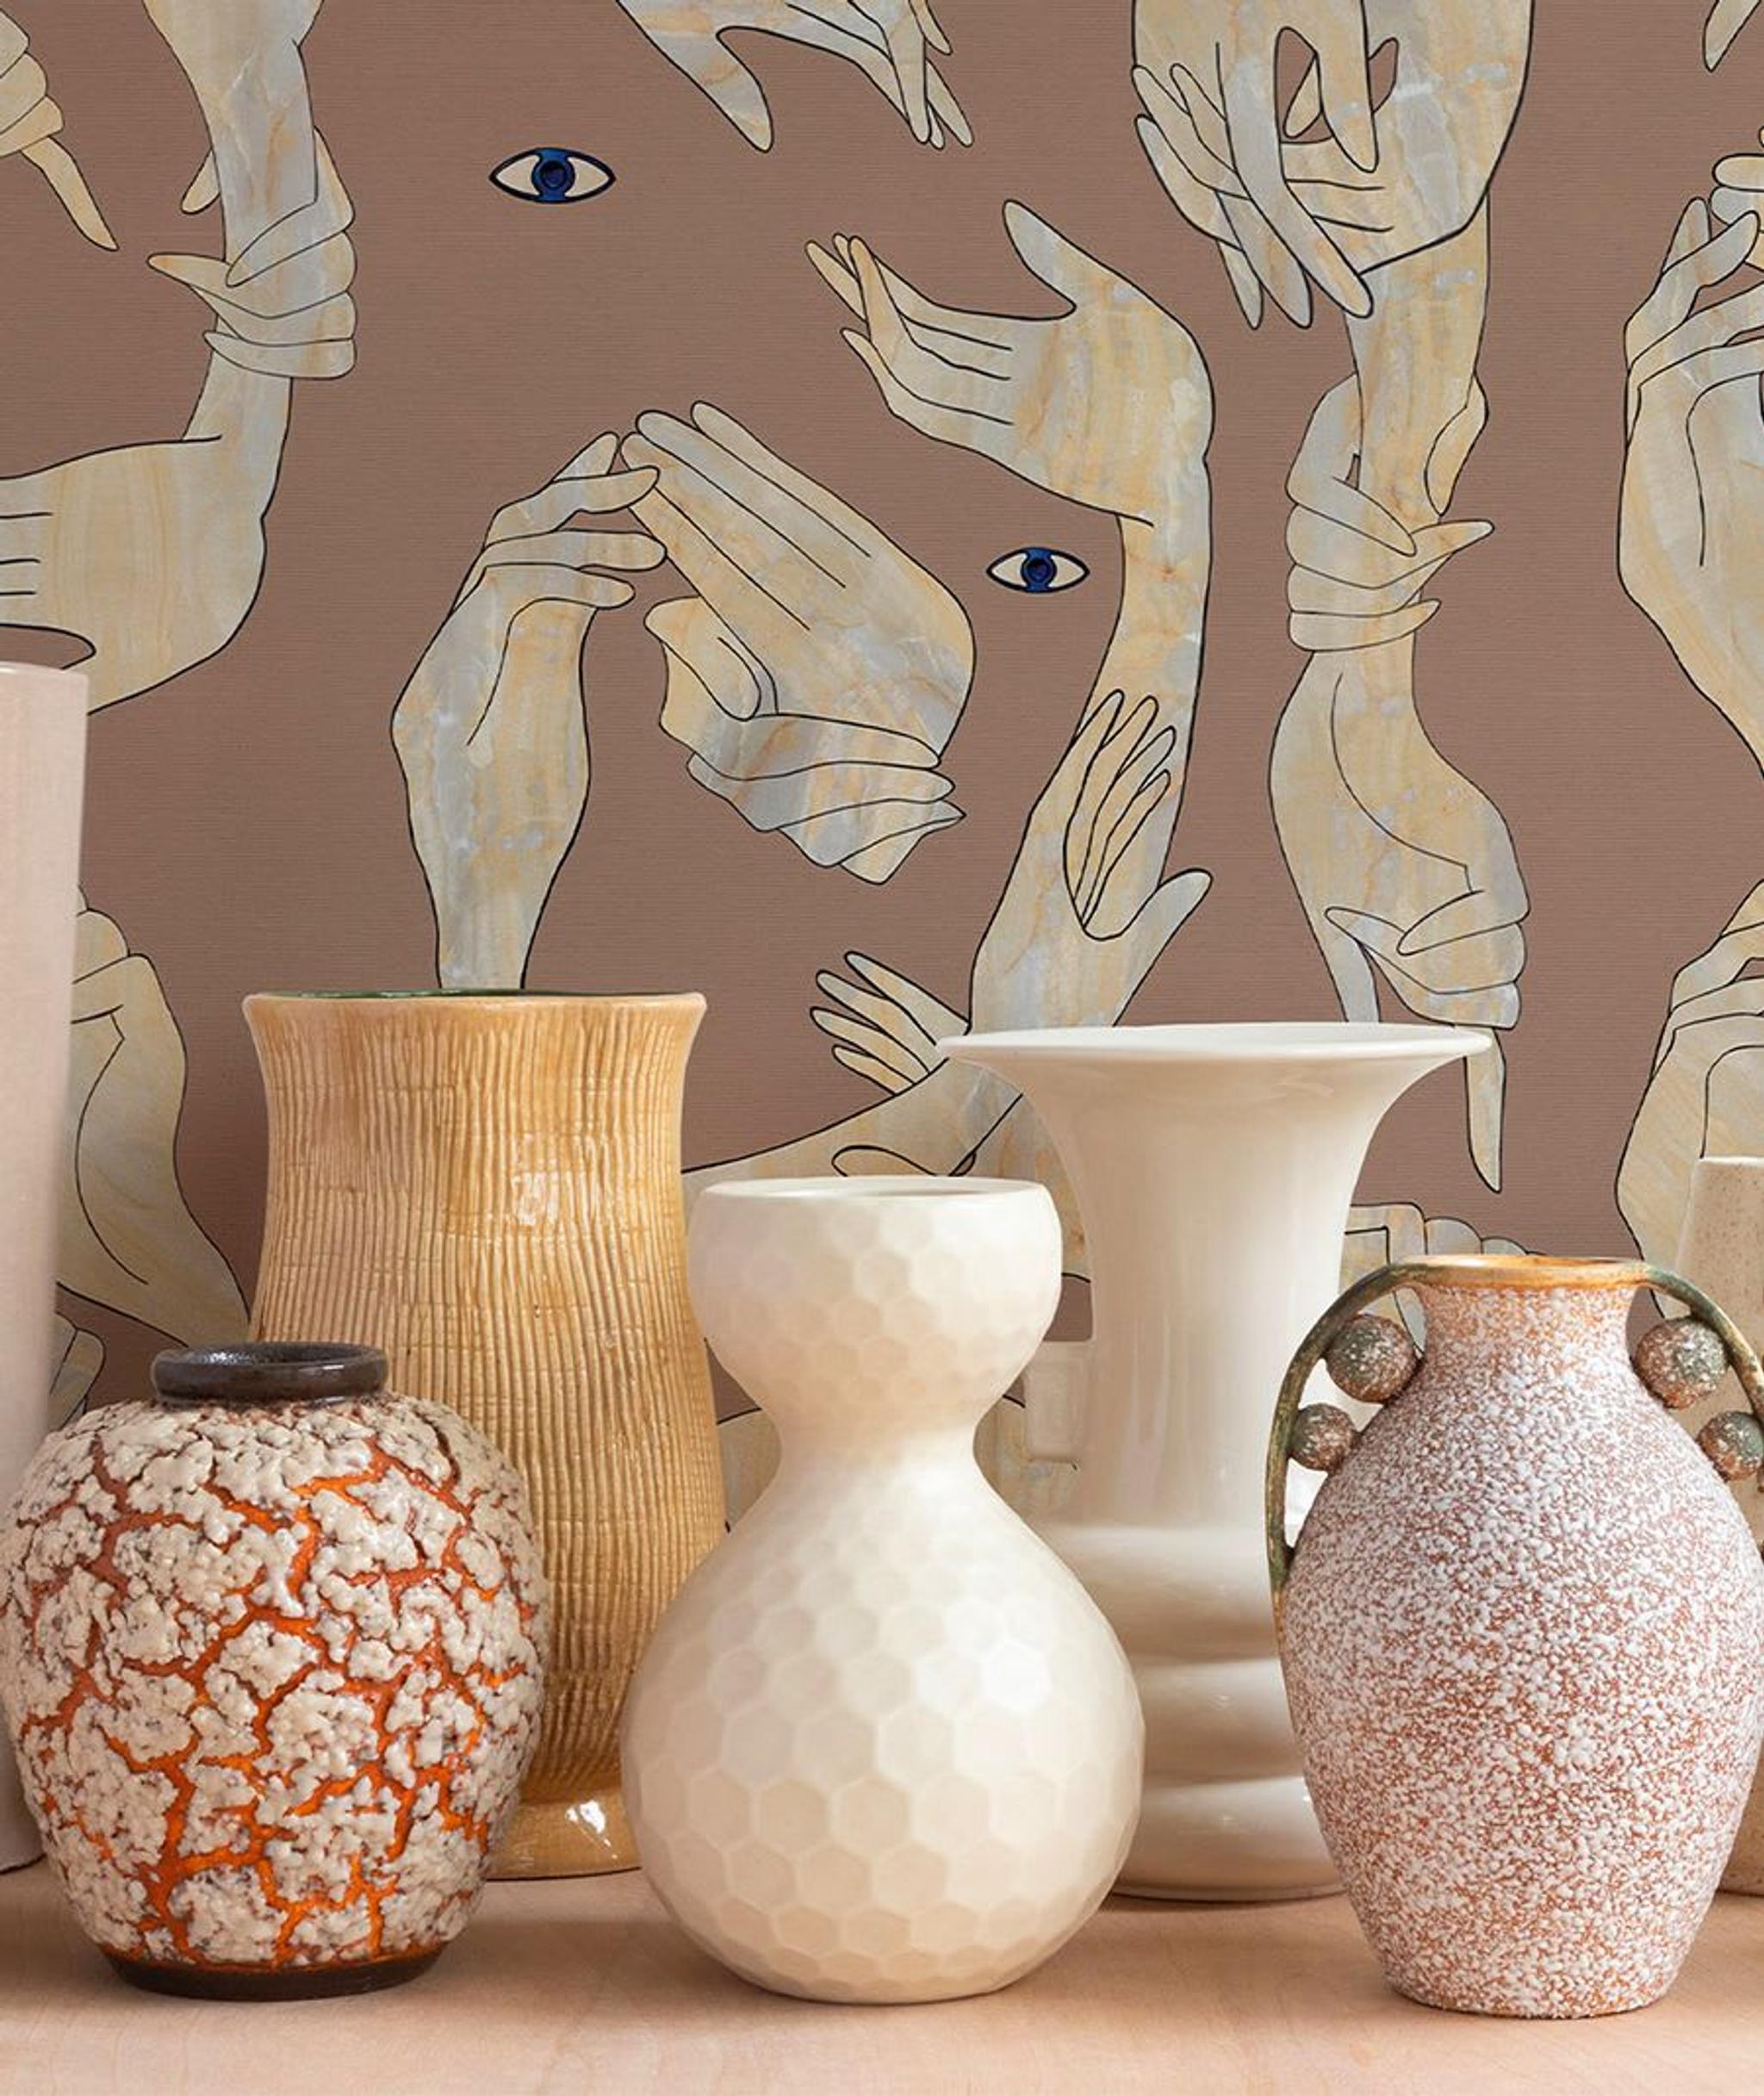 Dusty pink and cotton white surrealist wallpaper by MaVoix